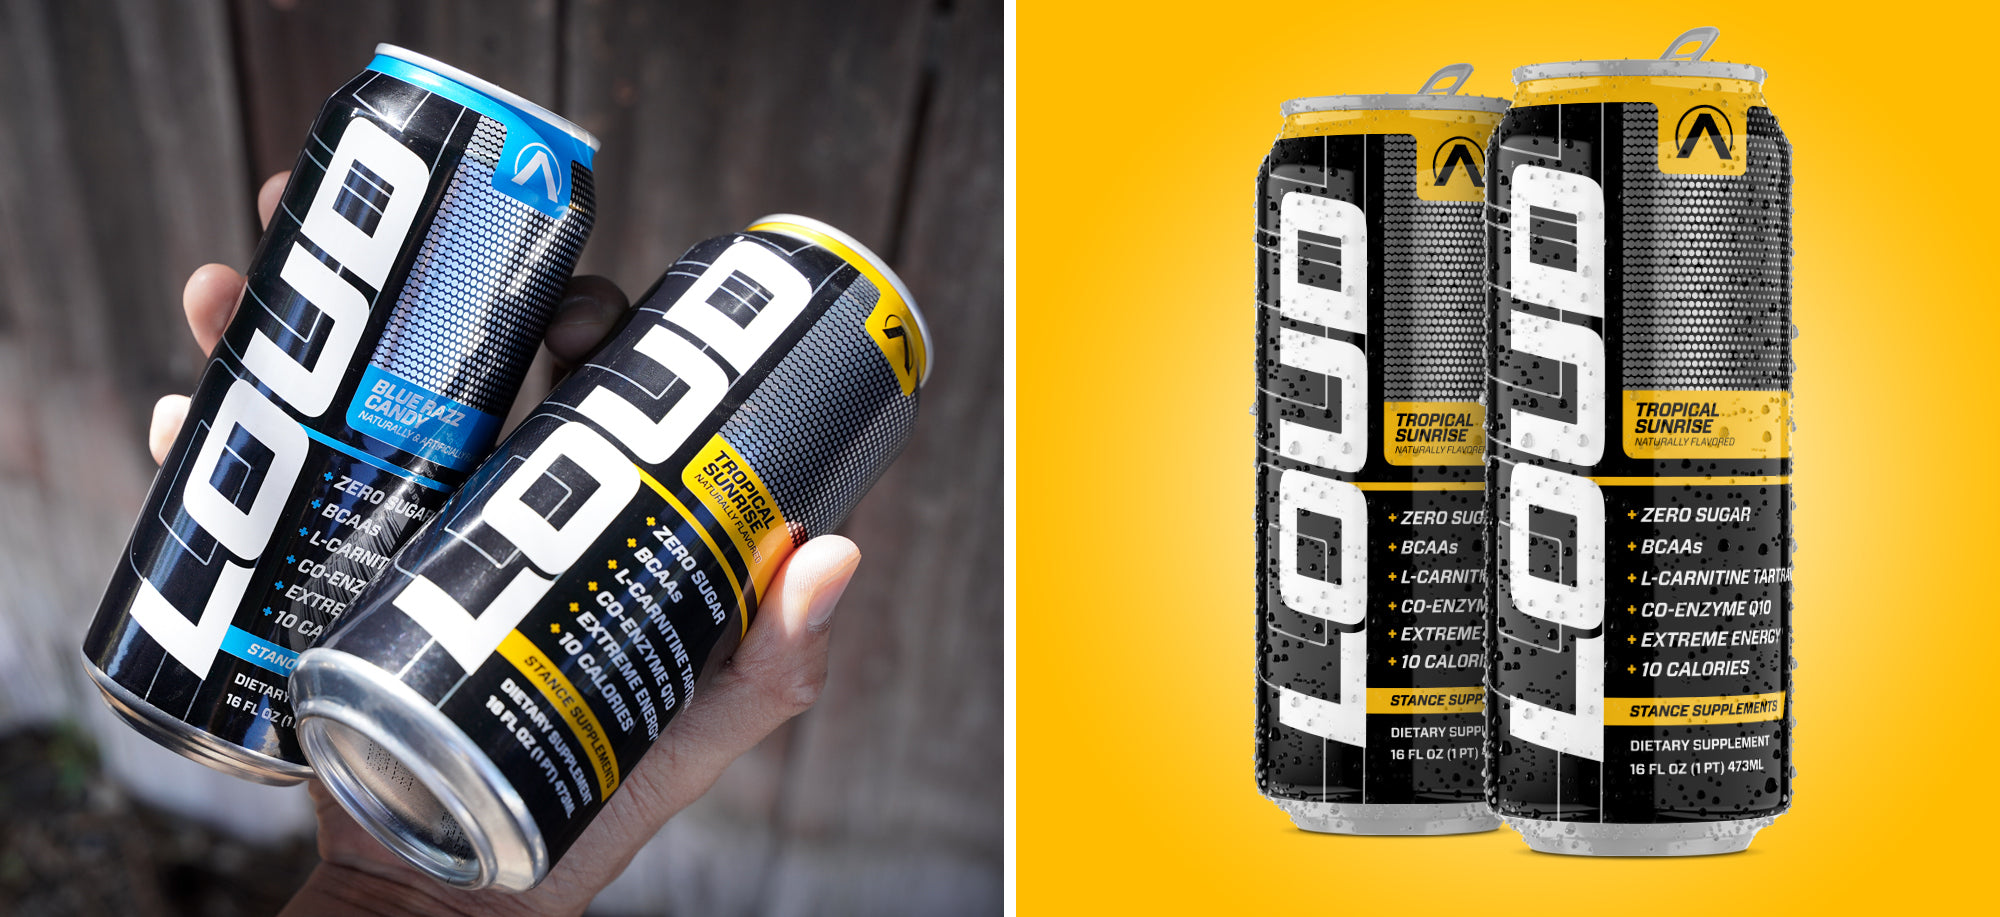 NEW Energy Drink by Stance Supplements® Lands Exclusively at NUTRISHOP®